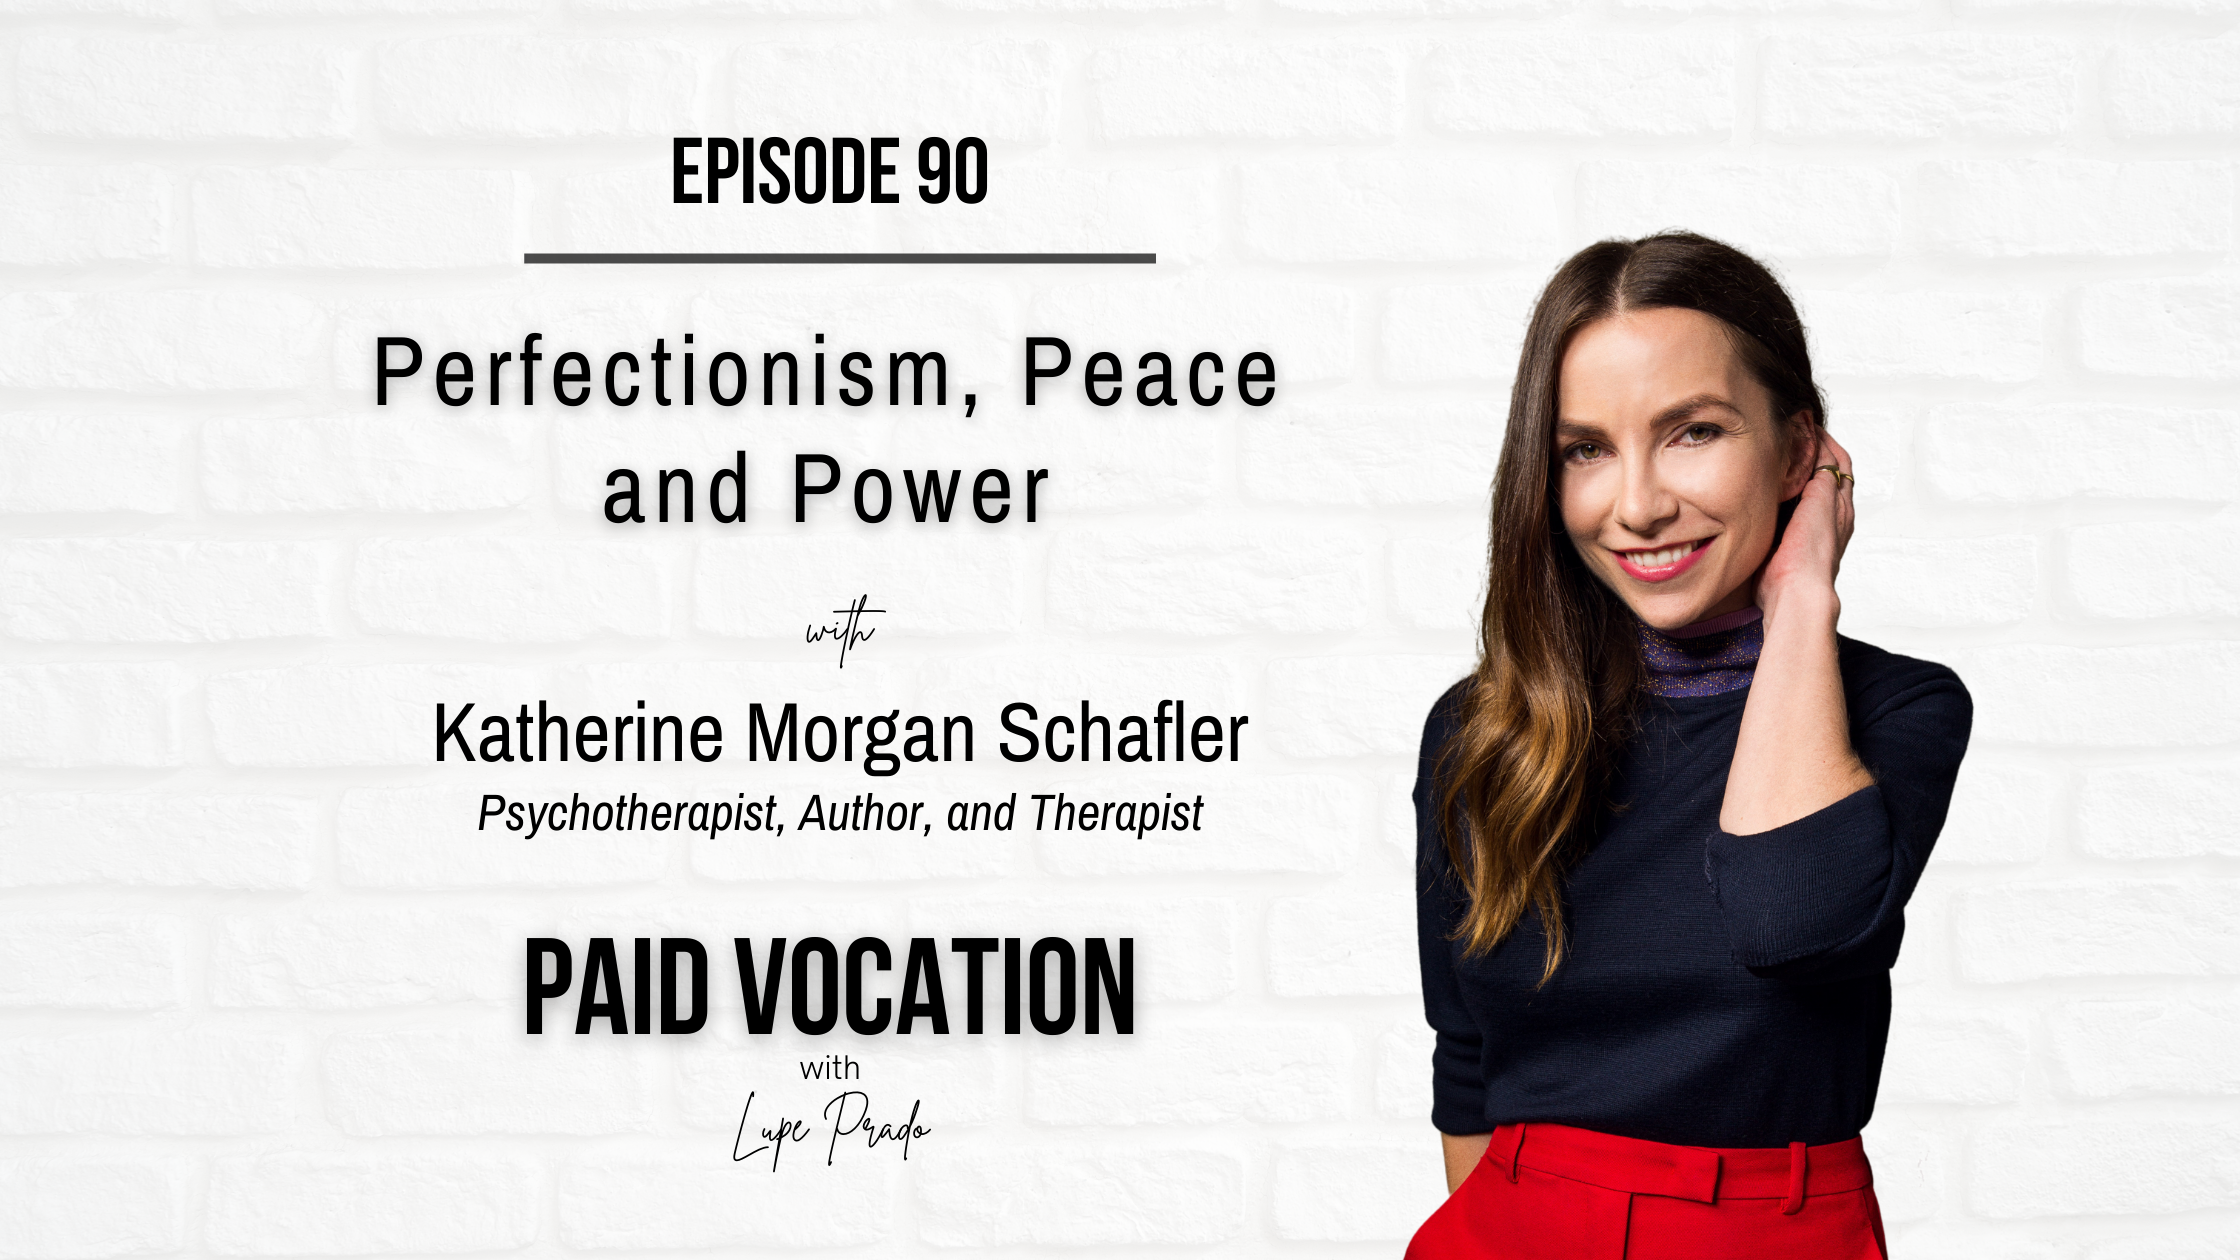 Perfectionism, Peace and Power with Katherine Morgan Schafler